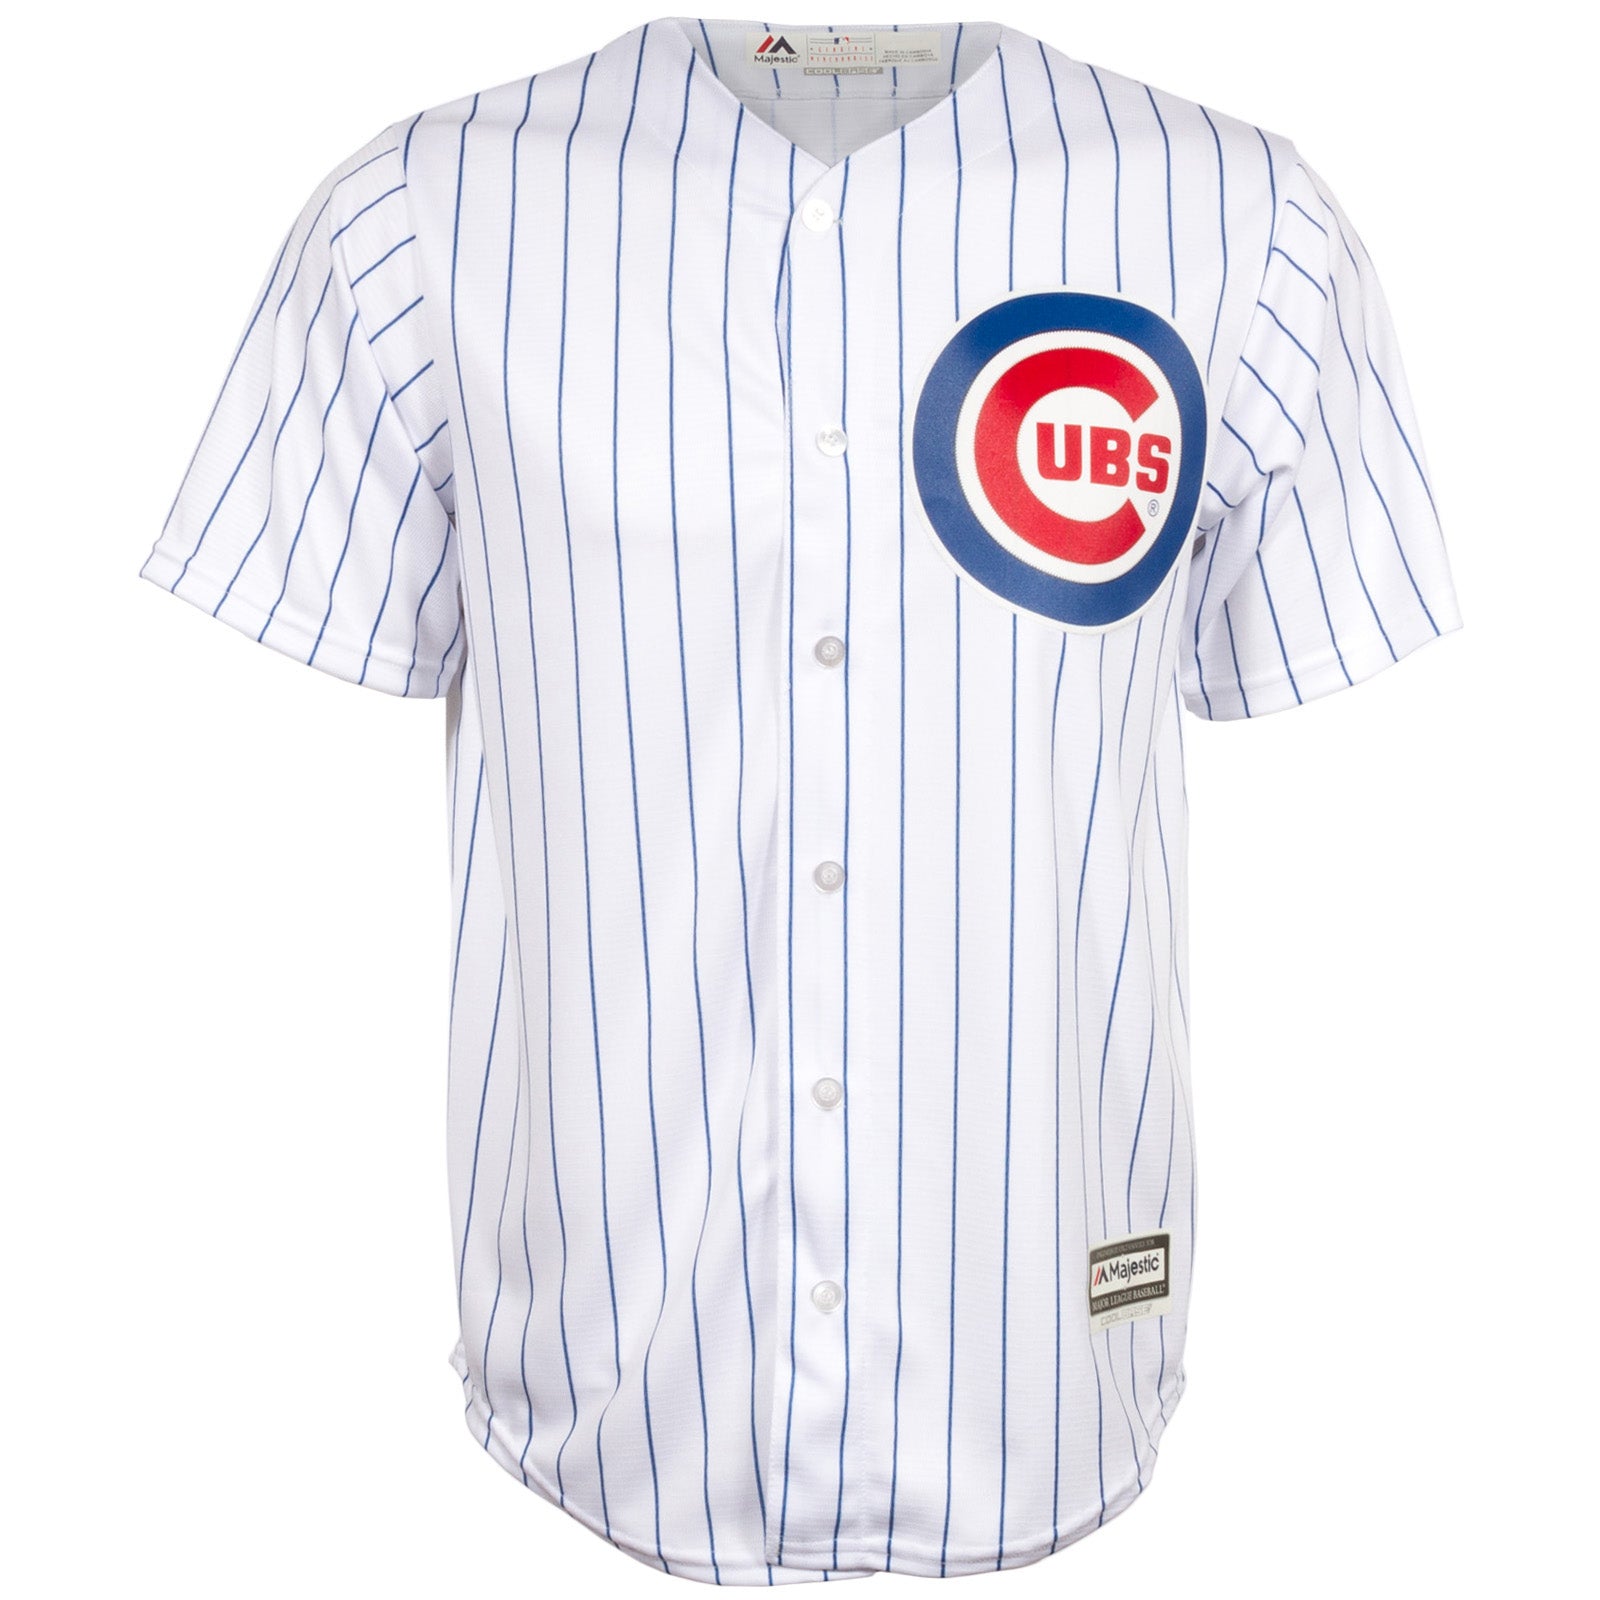 the cubs jersey